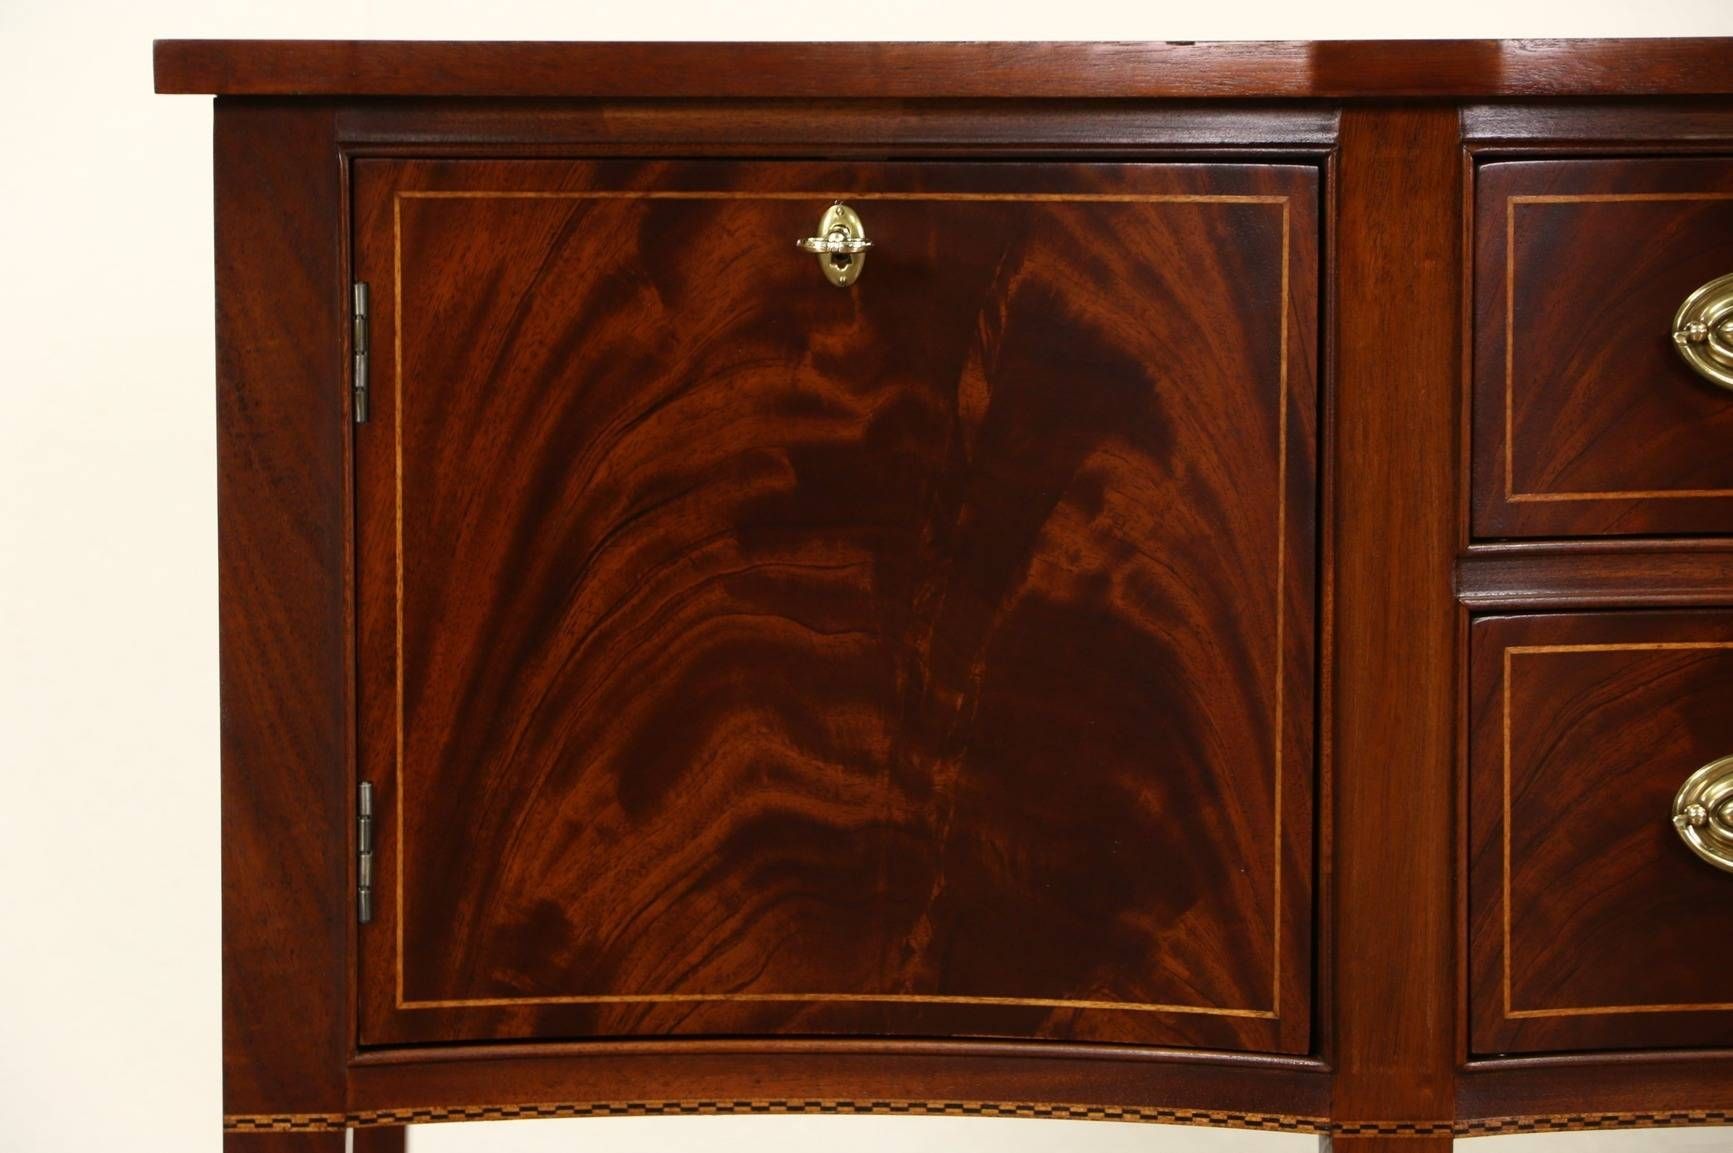 Sold – Hickory Masterpiece Signed Traditional Sideboard, Server Or Intended For Traditional Sideboard (View 13 of 20)